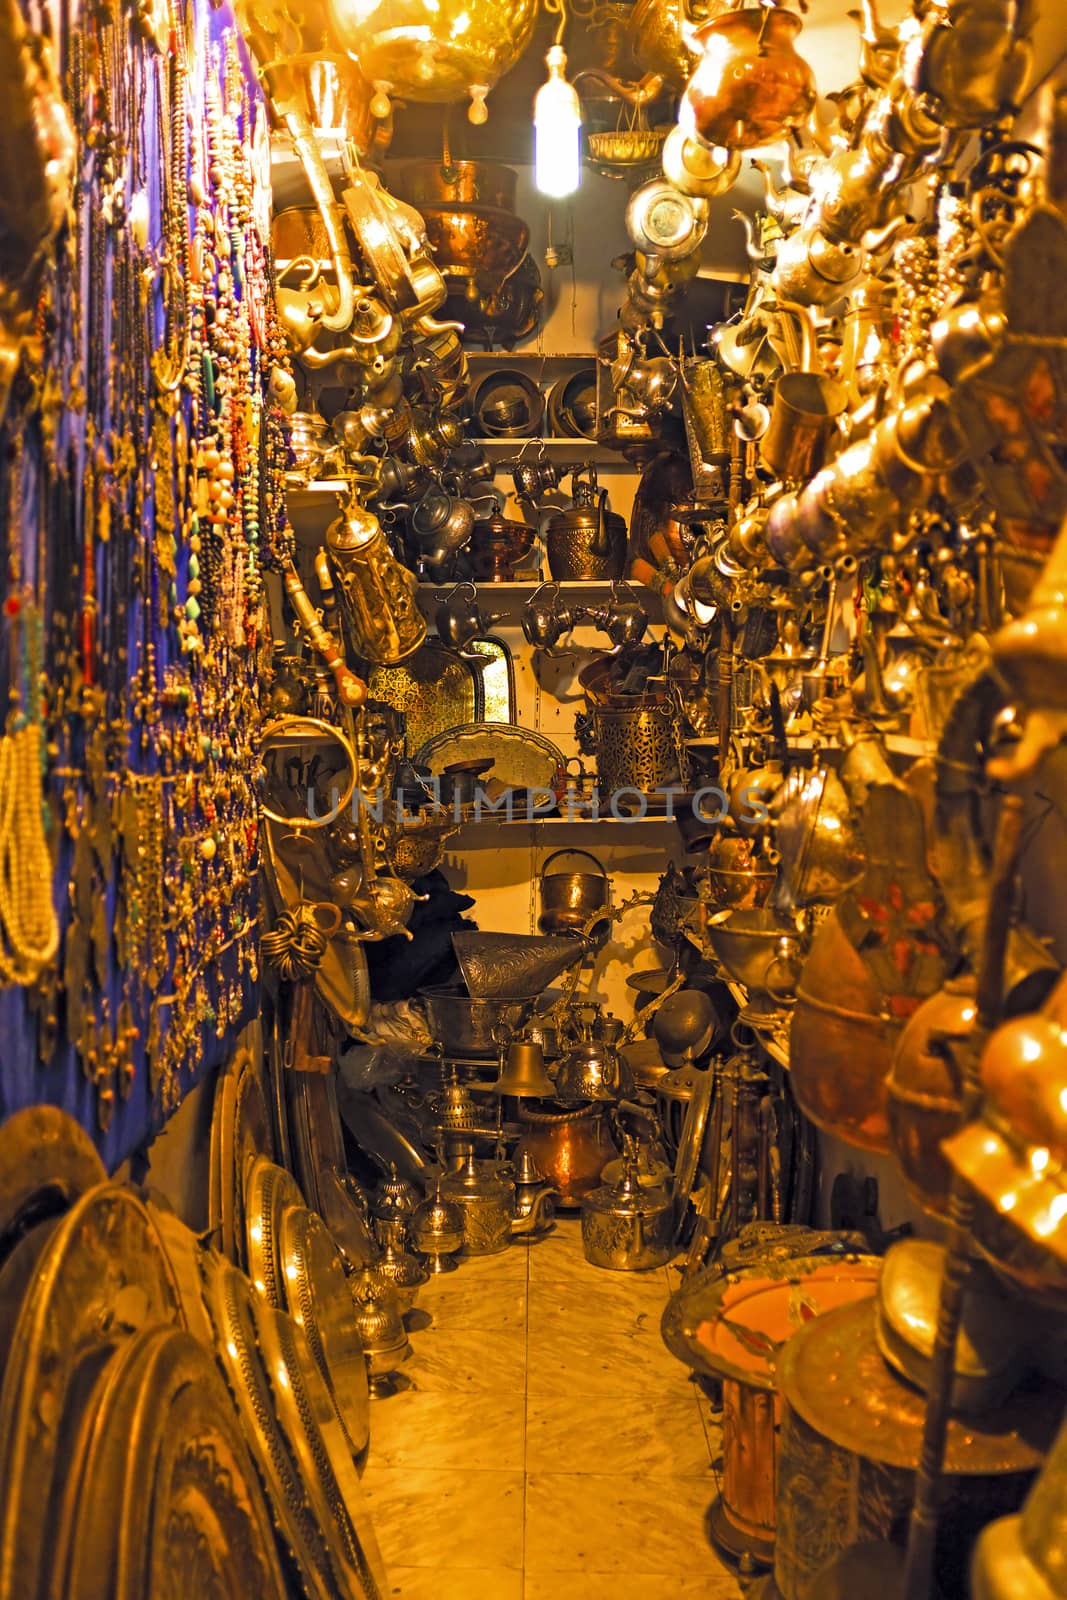 Moroccan shop with copper pots and goods